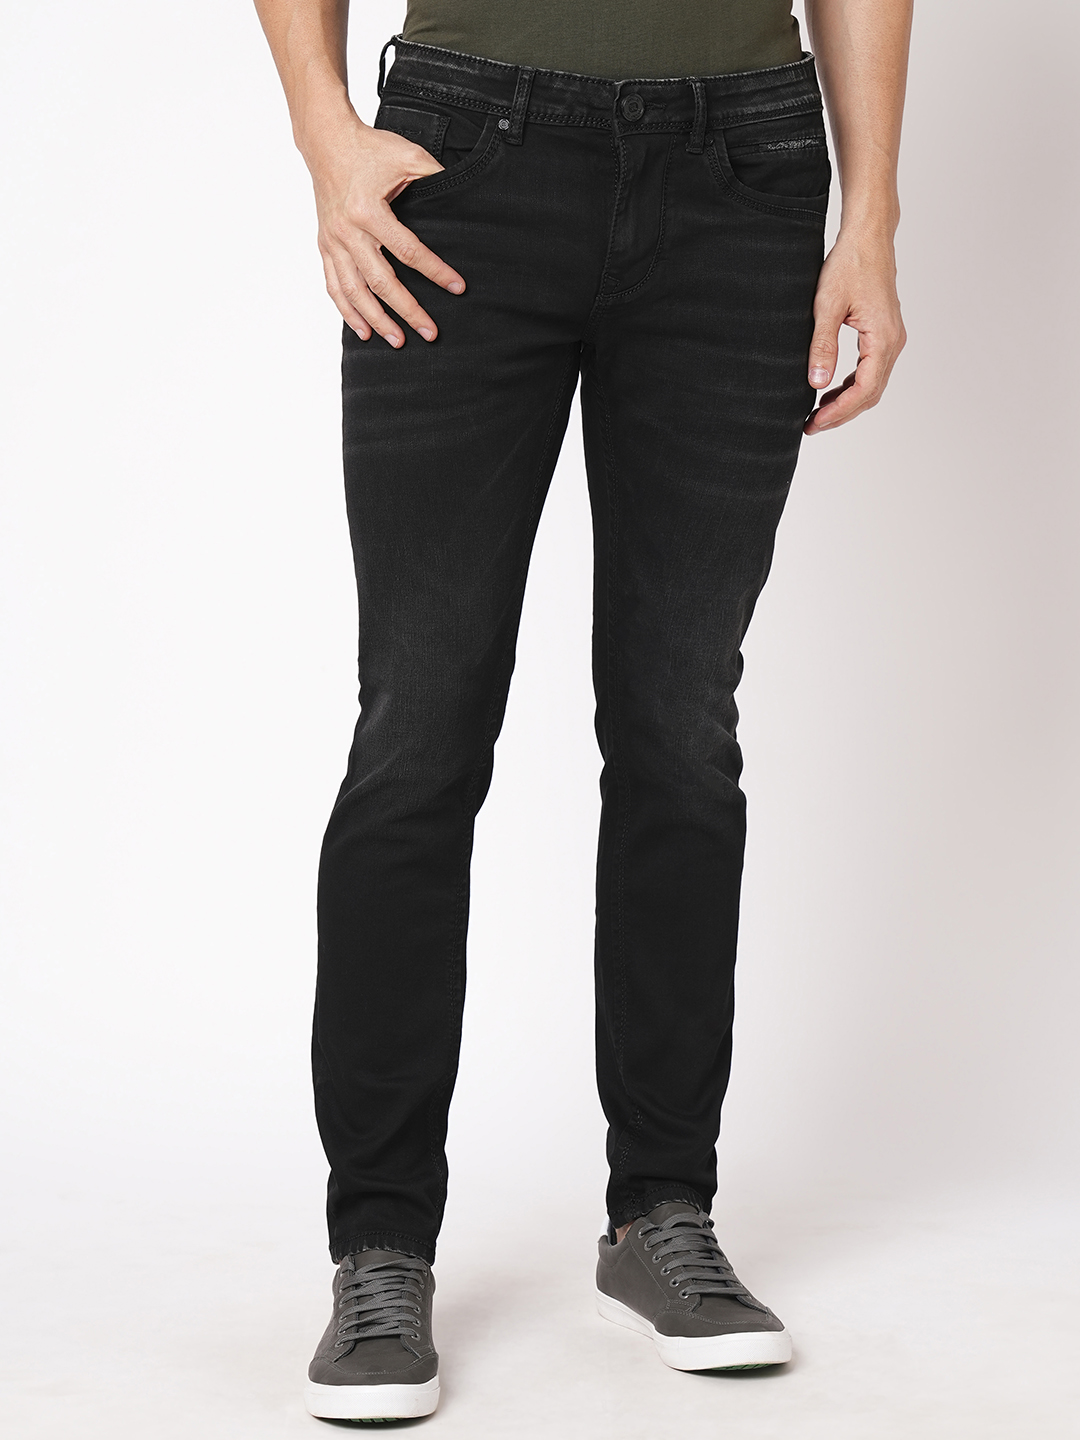 CHARCOAL 5 POCKET MID-RISE NARROW TAPERED FIT JEANS (BILLY FIT)